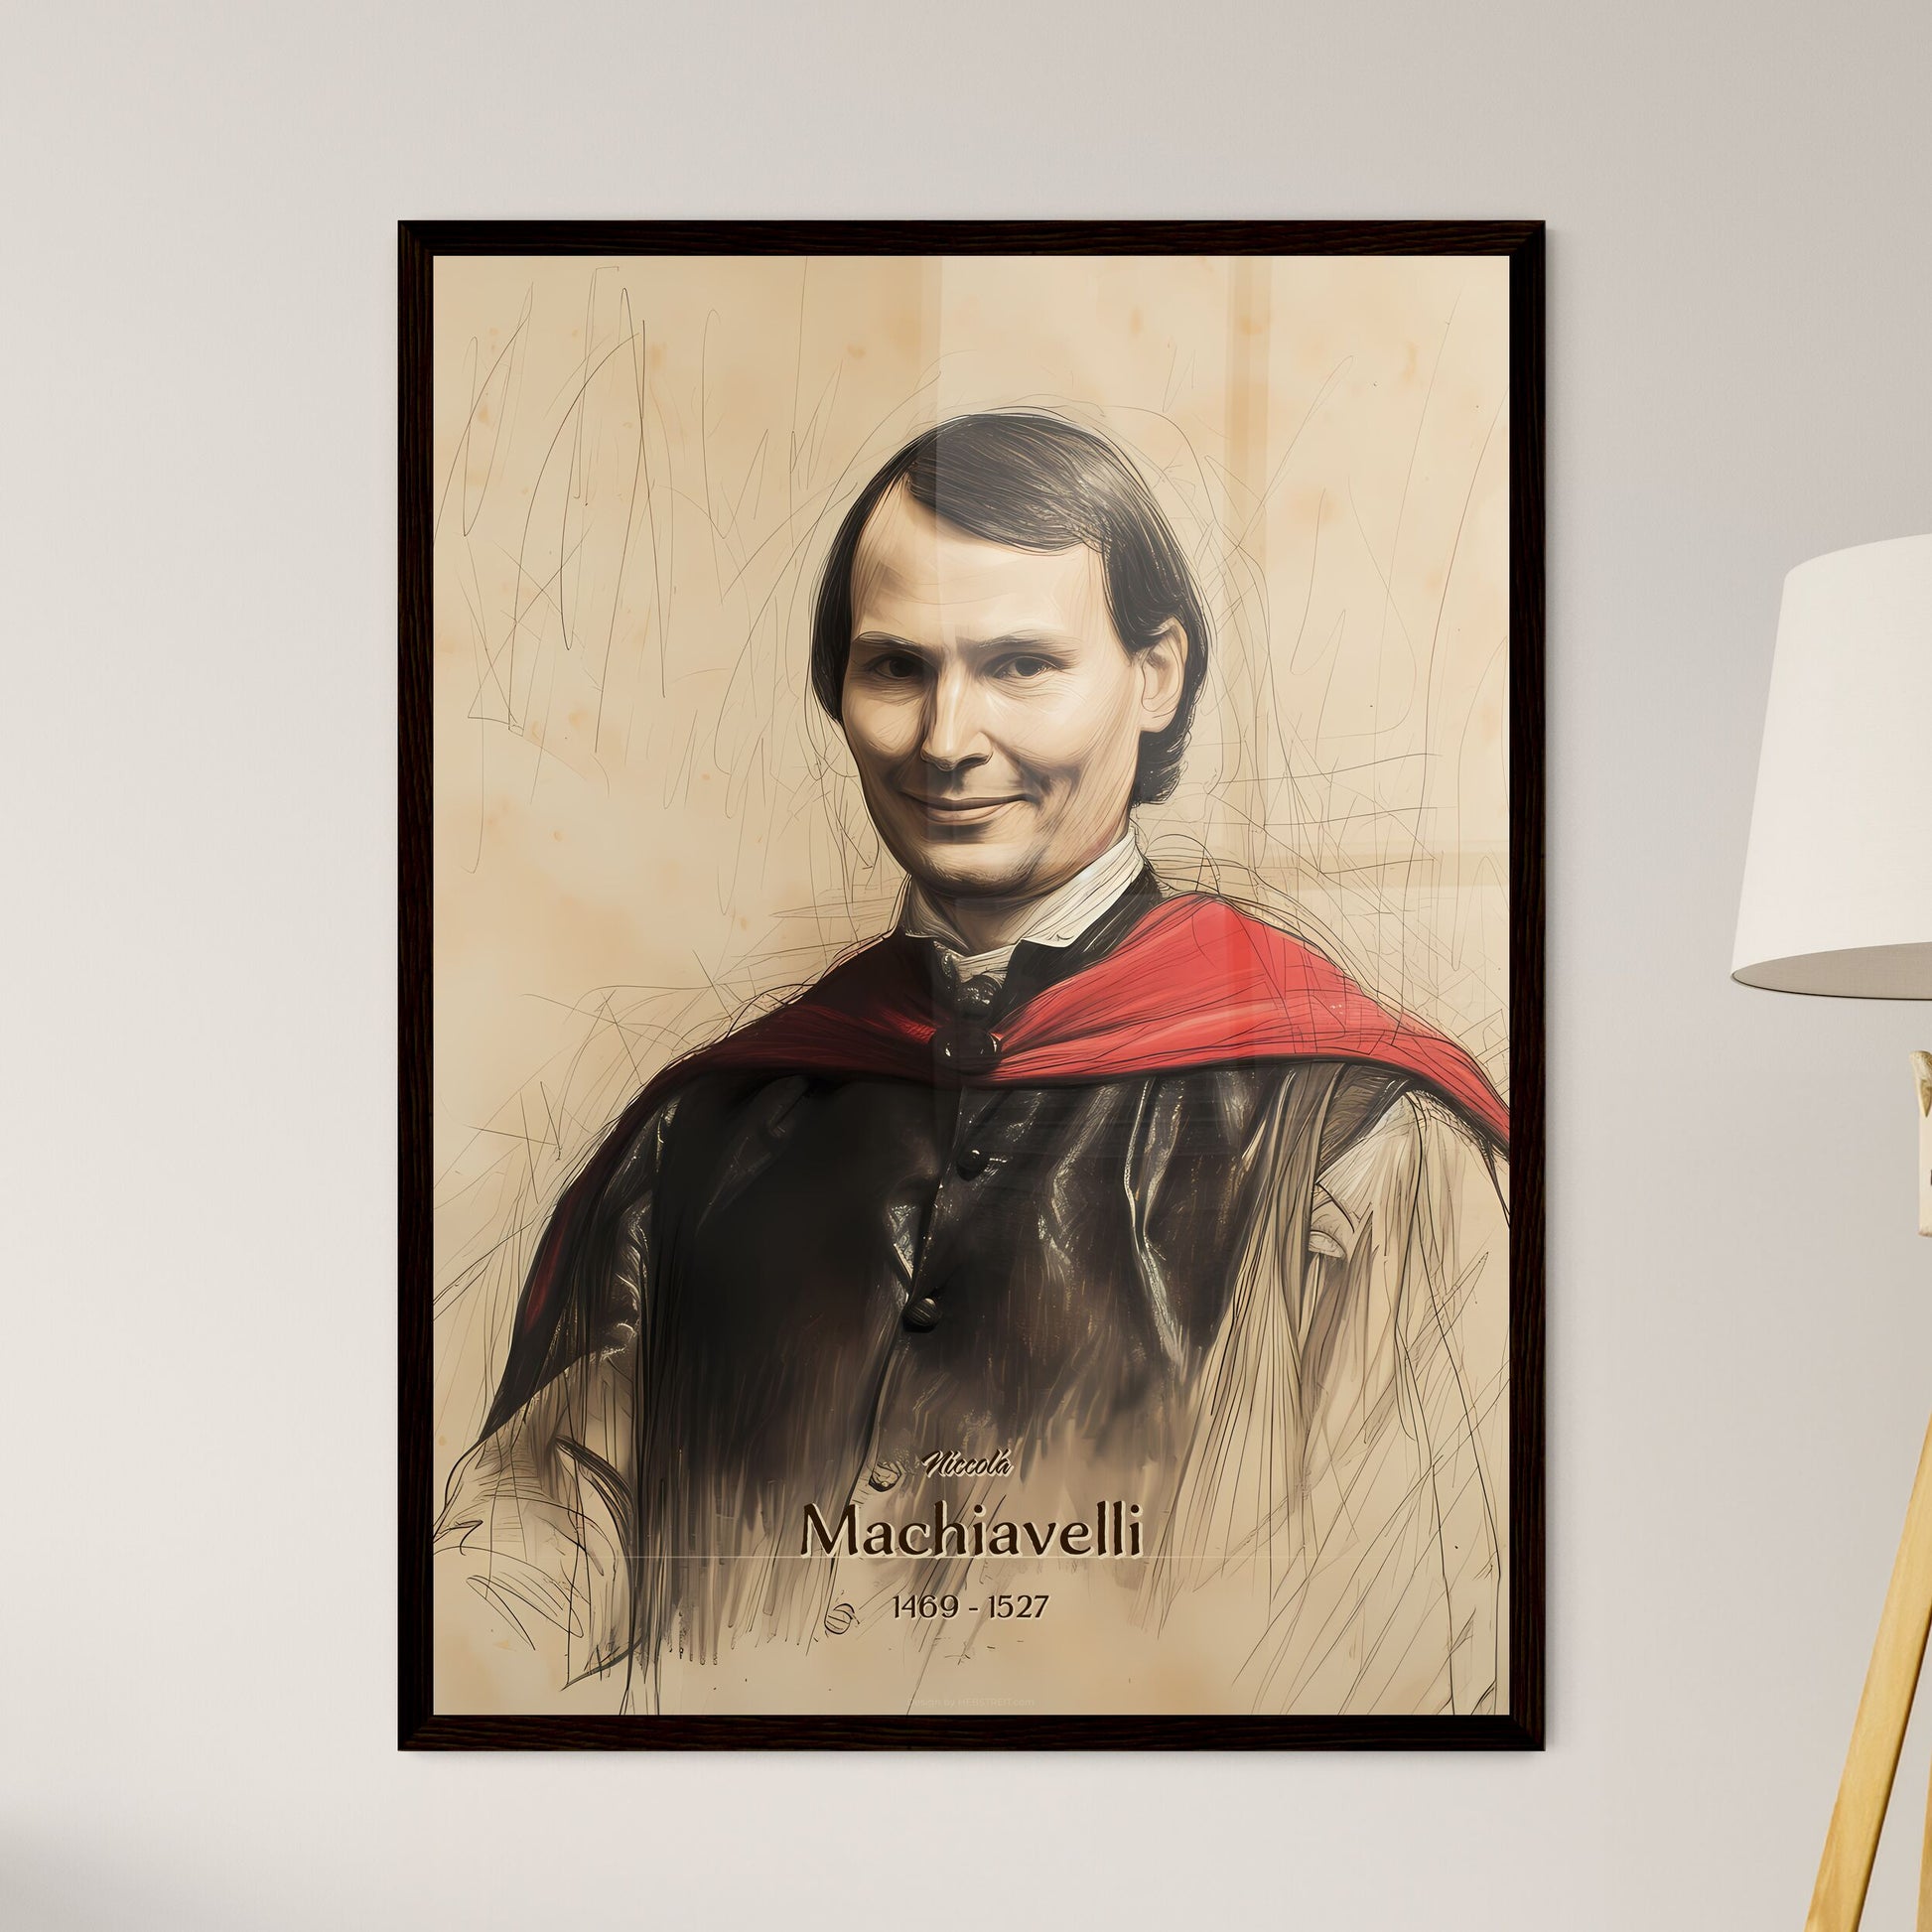 Niccolá, Machiavelli, 1469 - 1527, A Poster of a man wearing a red cape Default Title